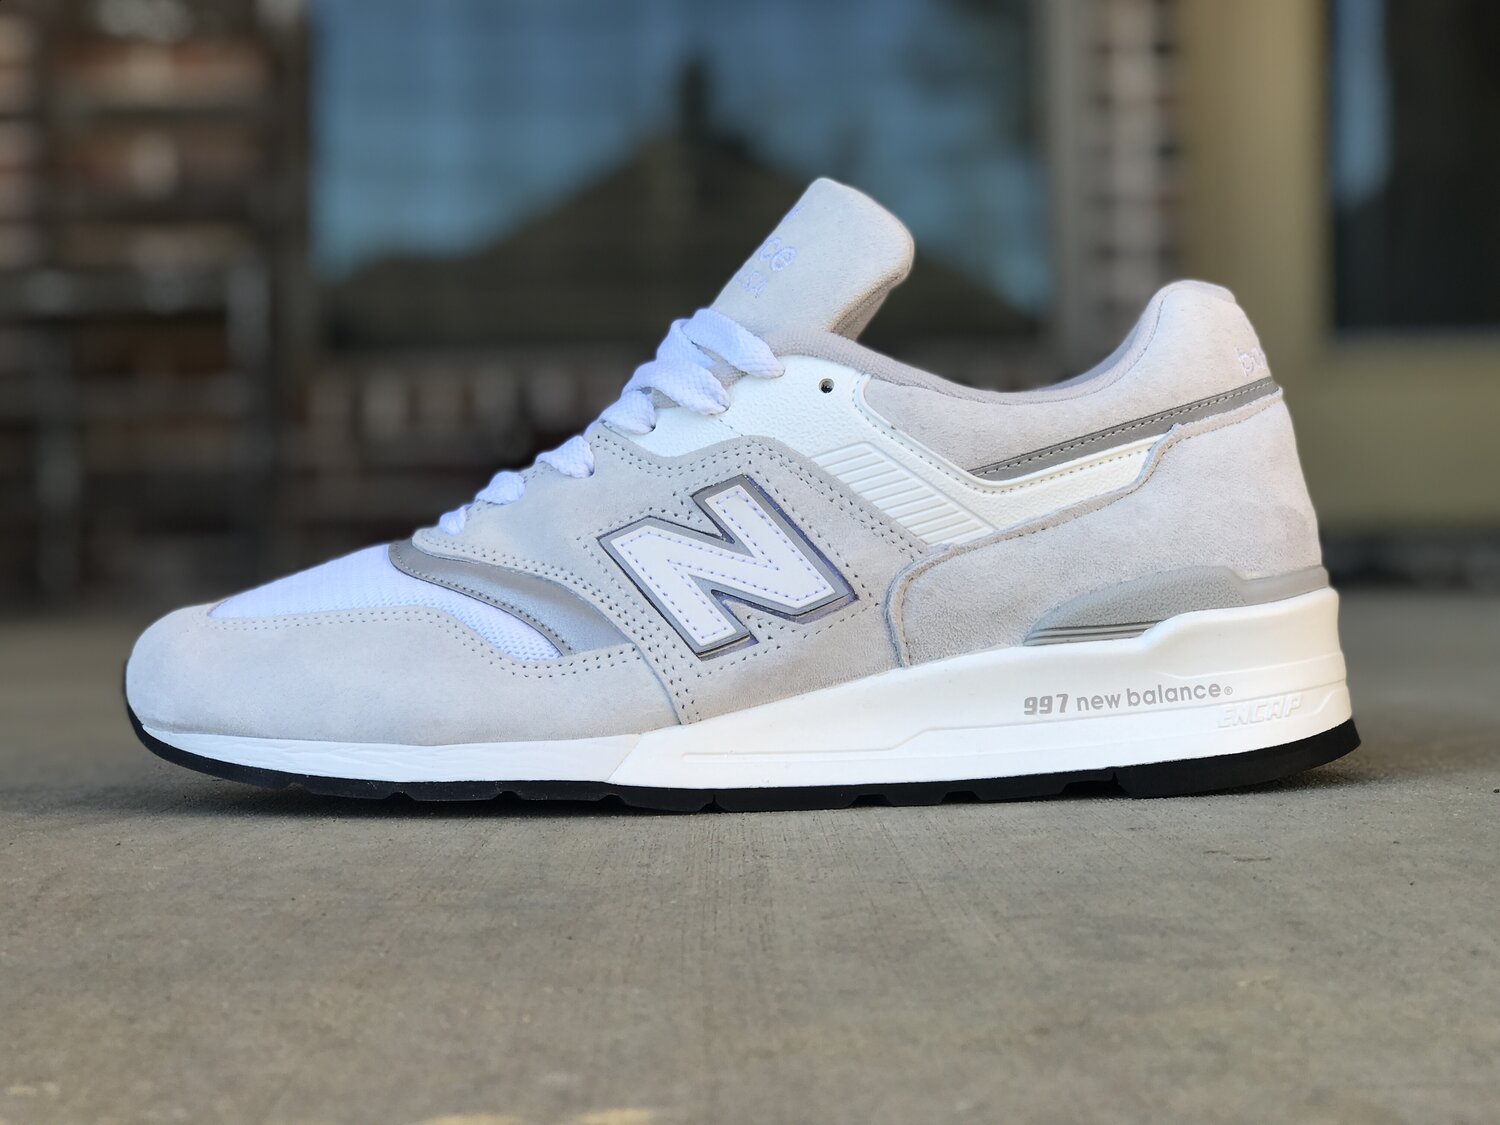 Unboxing The in the USA New 997 "Trifecta" [Video] The Retro